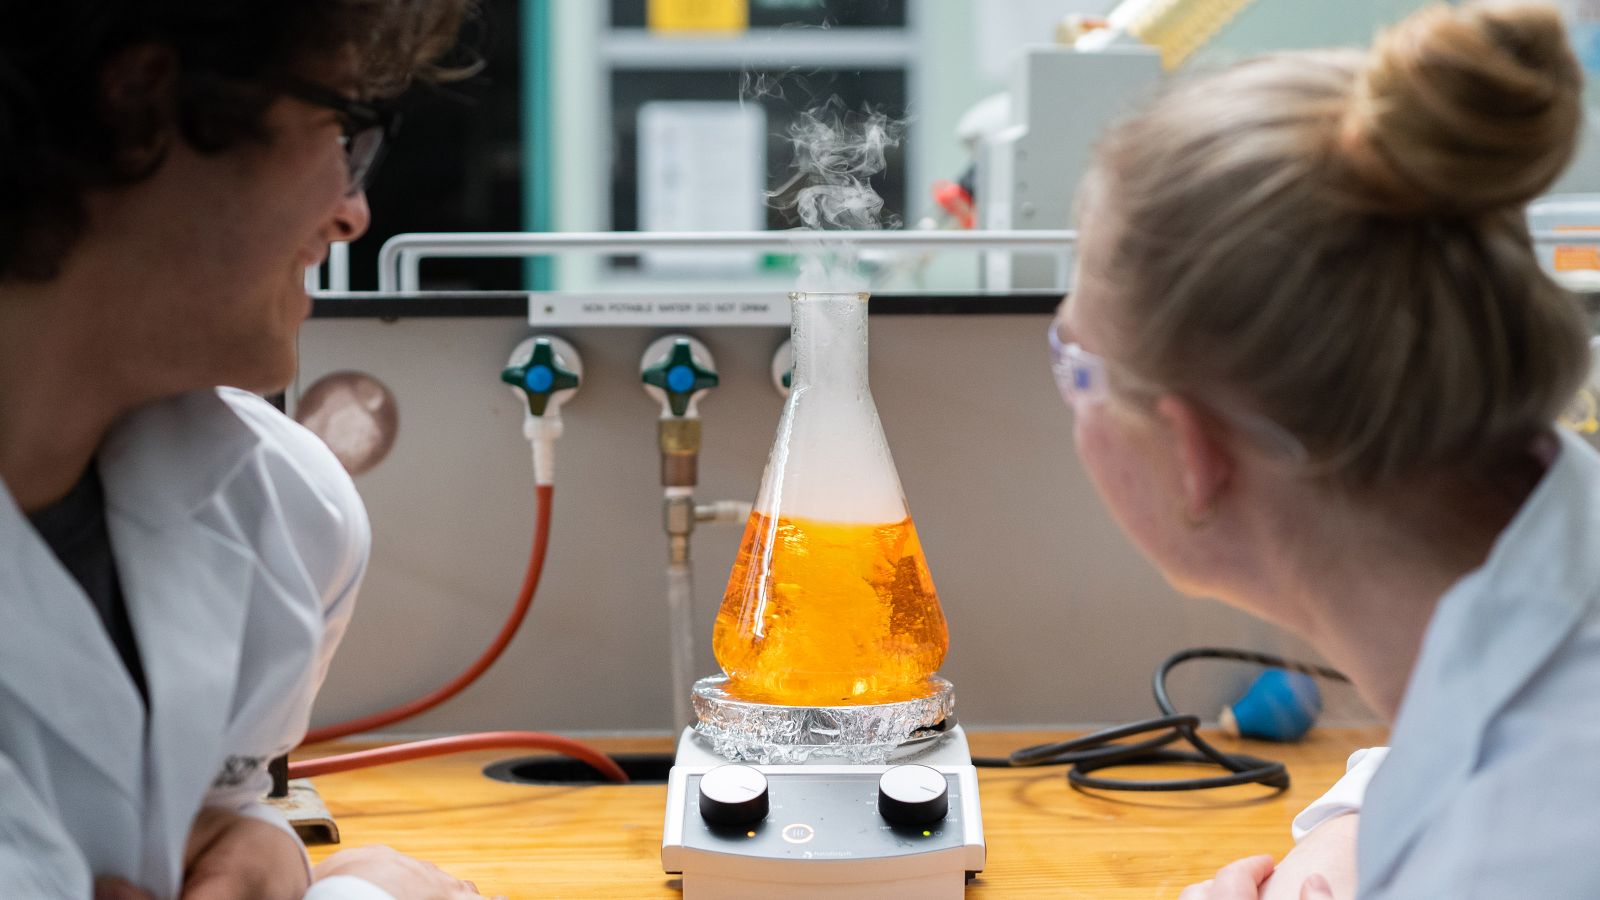 Chemsitry students looking at liquid in a flask. Image copyright Victoria University of Wellington.